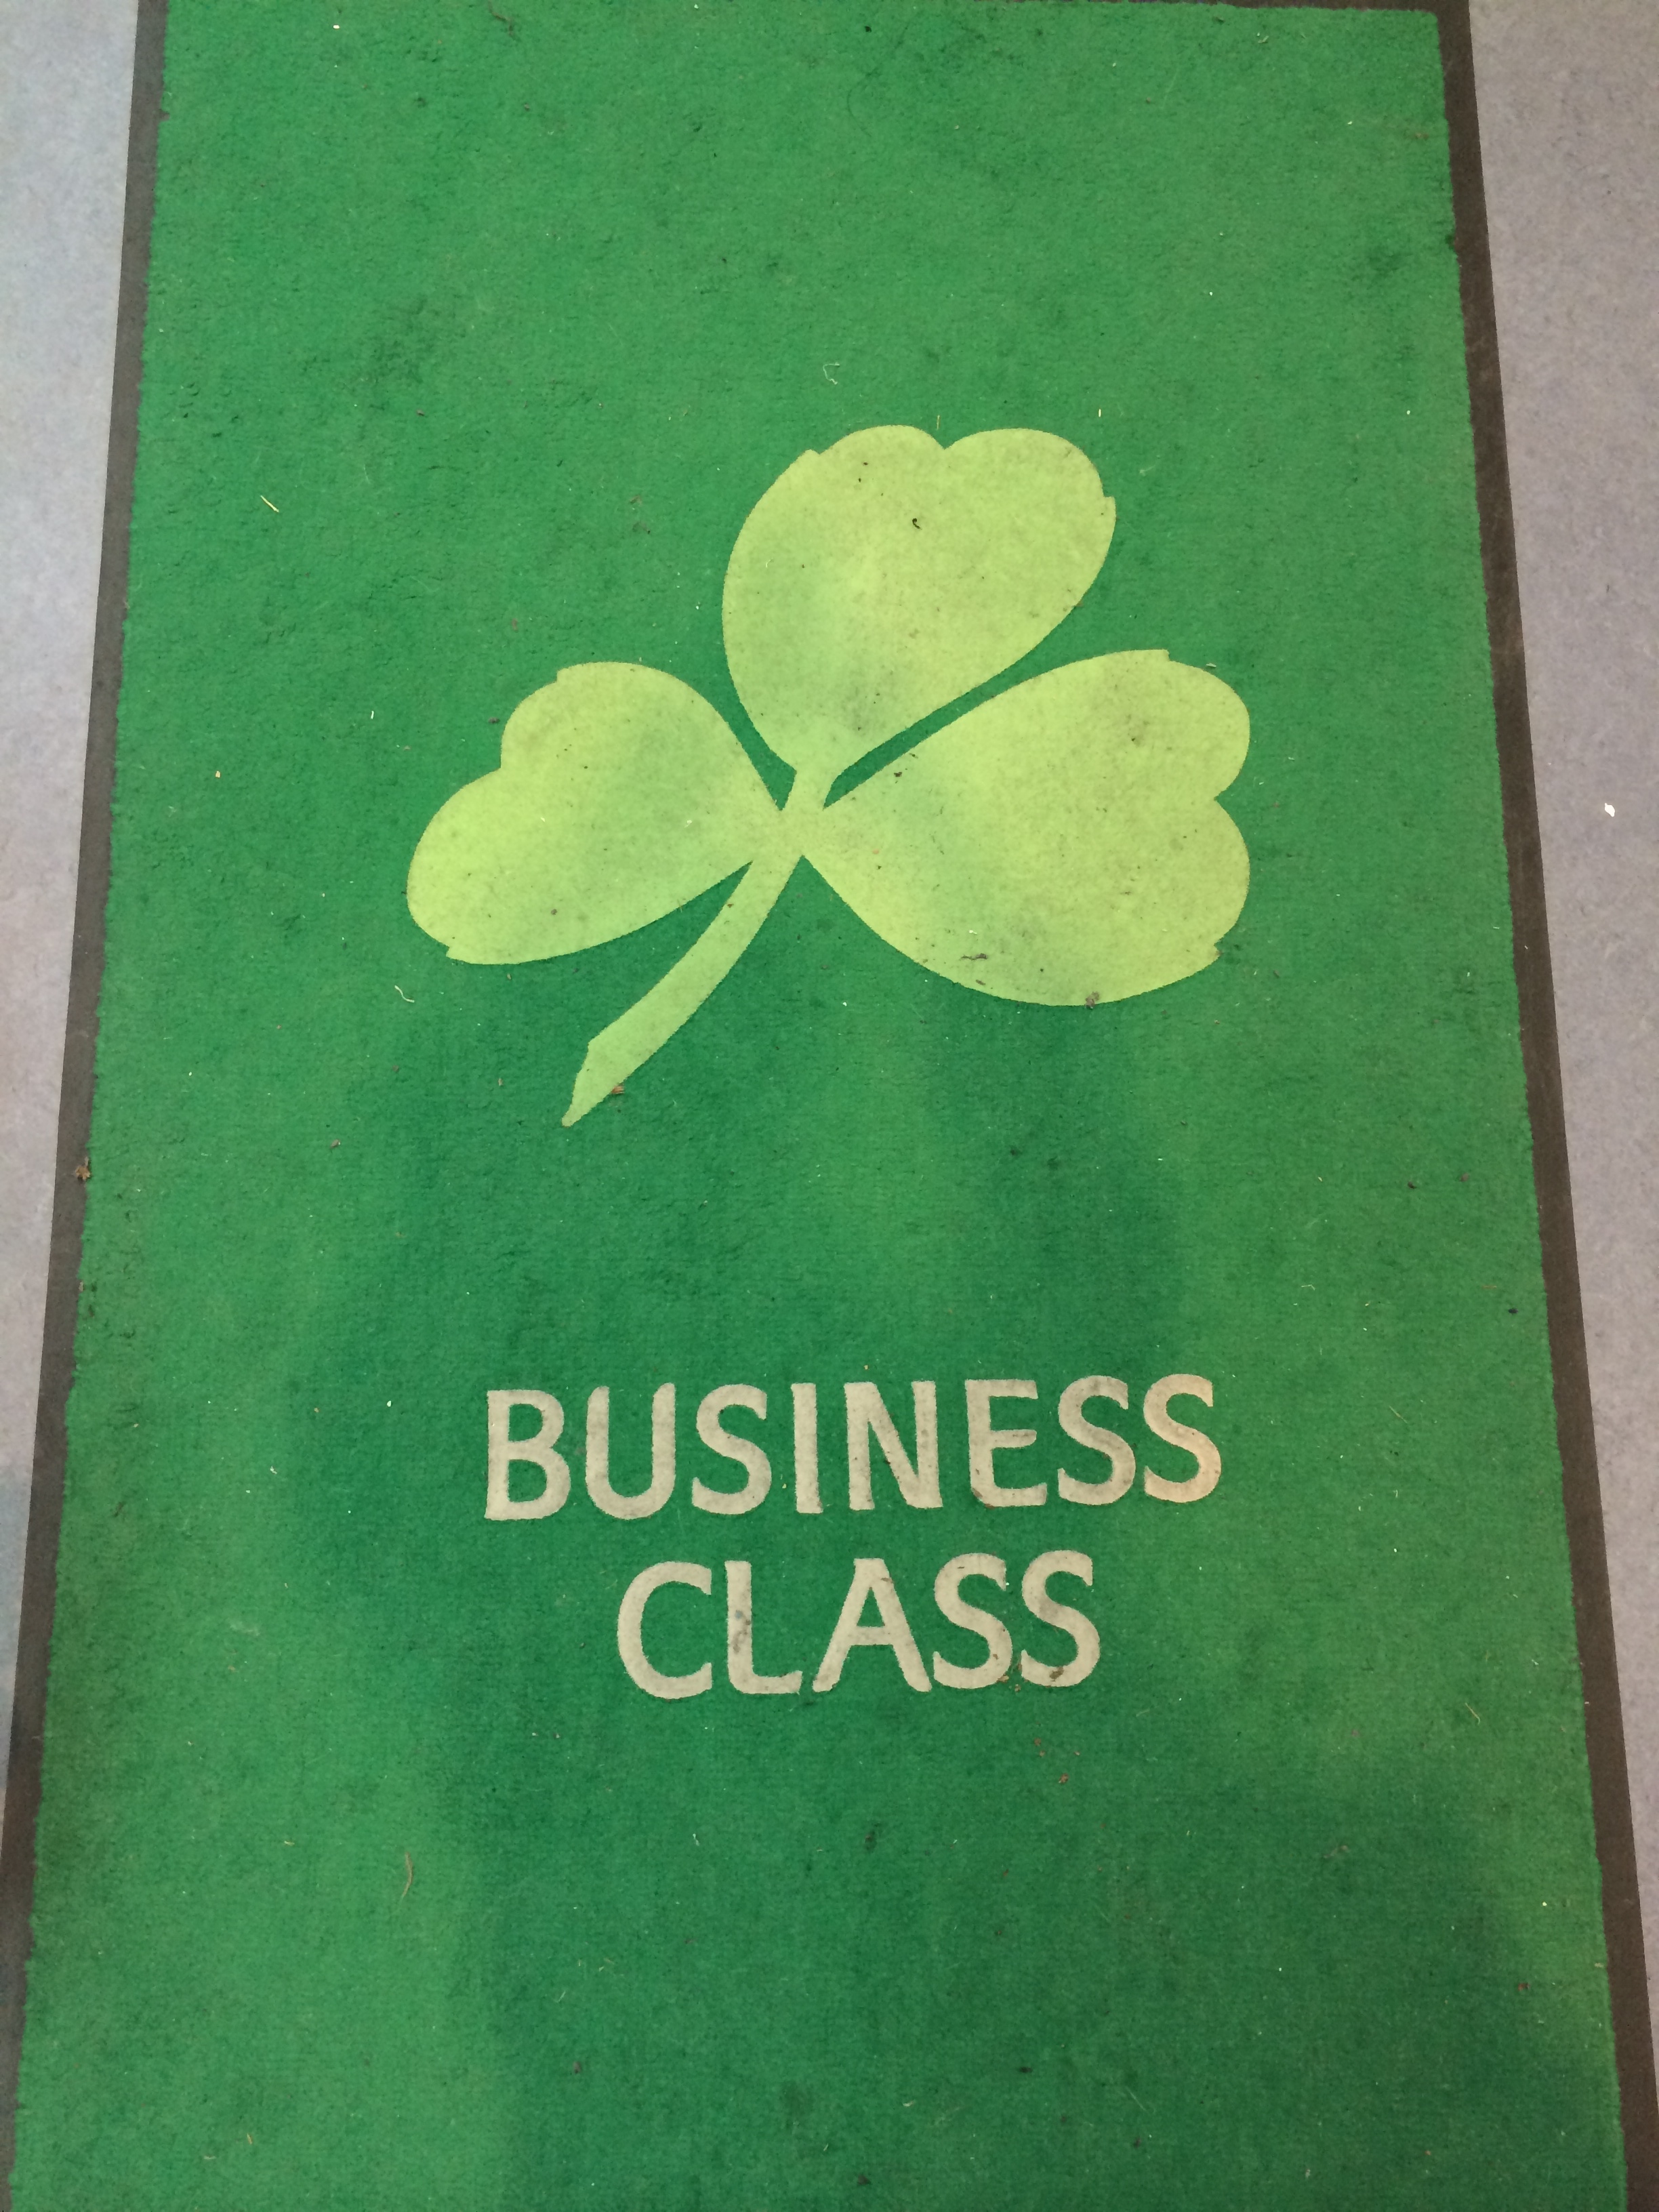 a green sign with a clover on it